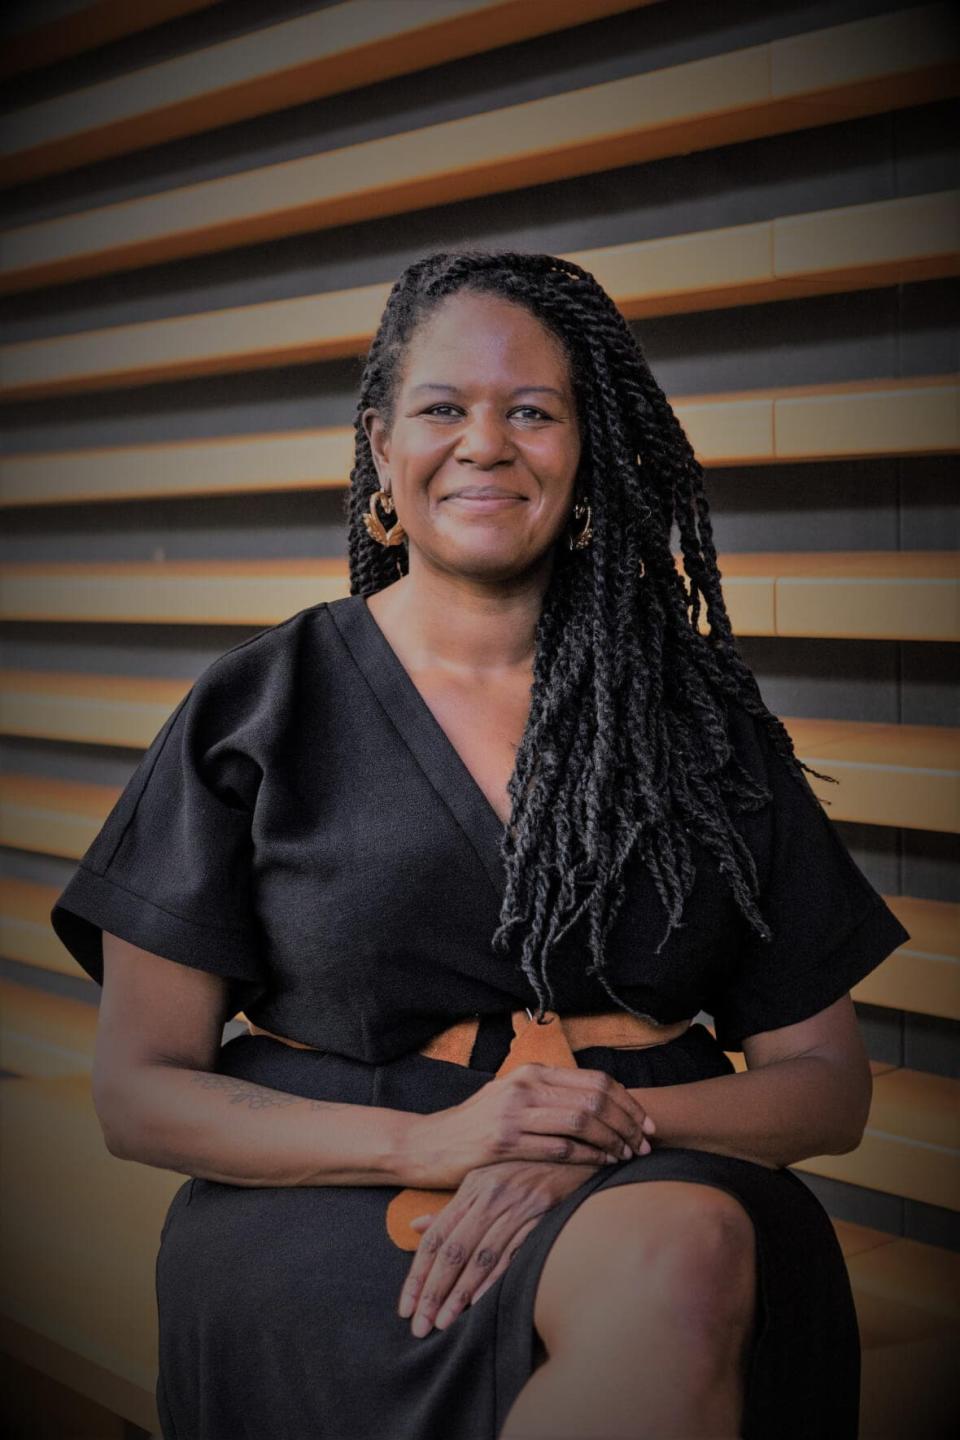 Key Jo Lee is the new chief of curatorial affairs and public programs at the Museum of African Diaspora in San Francisco. (Credit: Amber Ford)